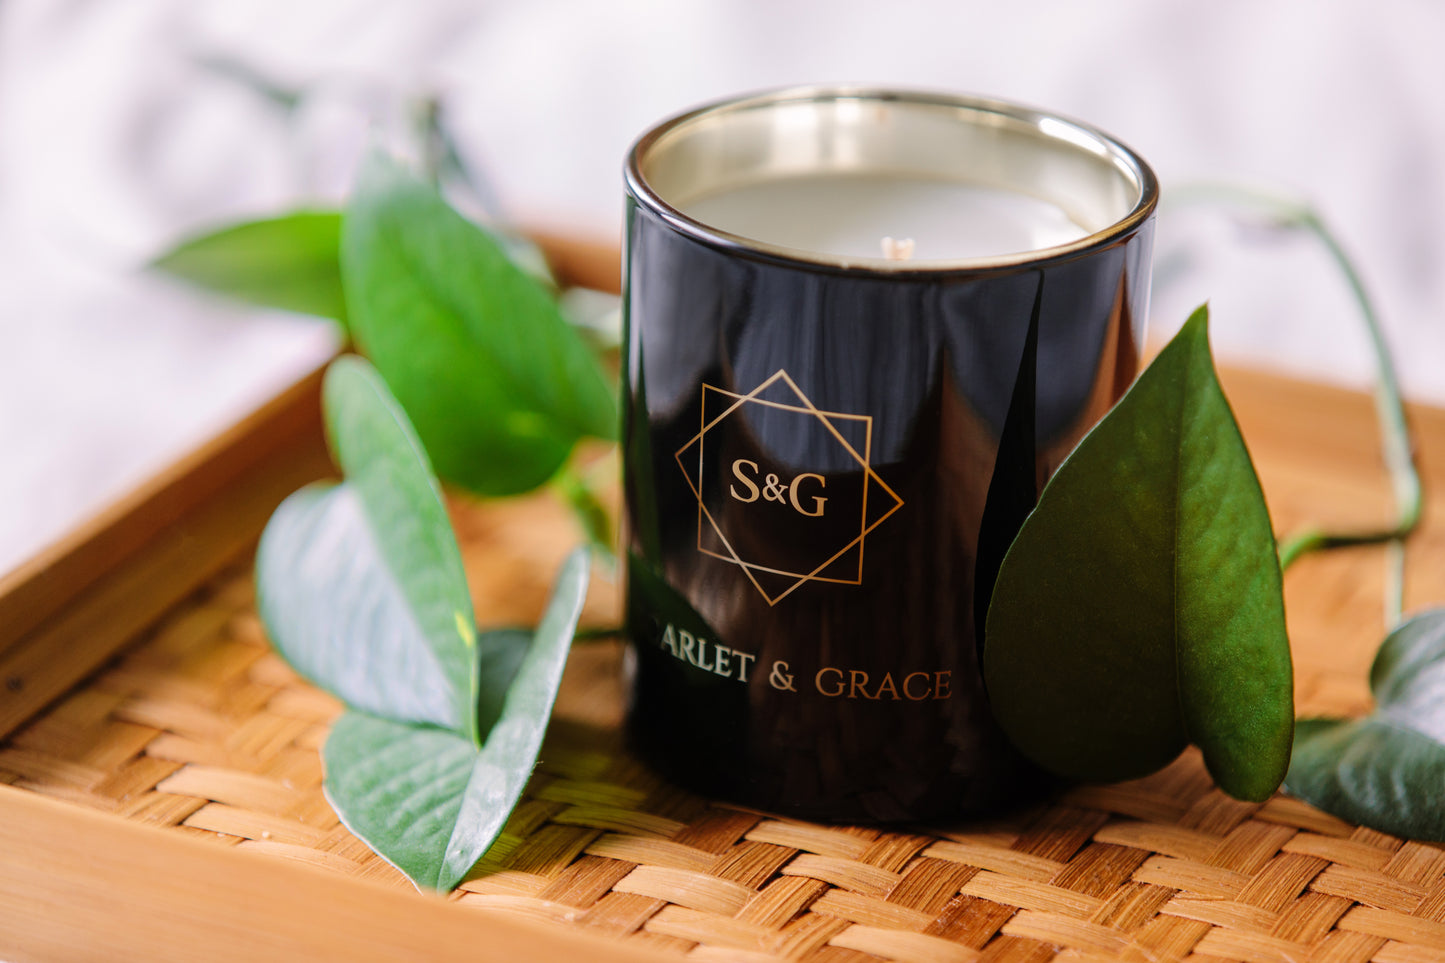 Coconut Lime - 70gm Soy Wax Candle - Scarlet & Grace